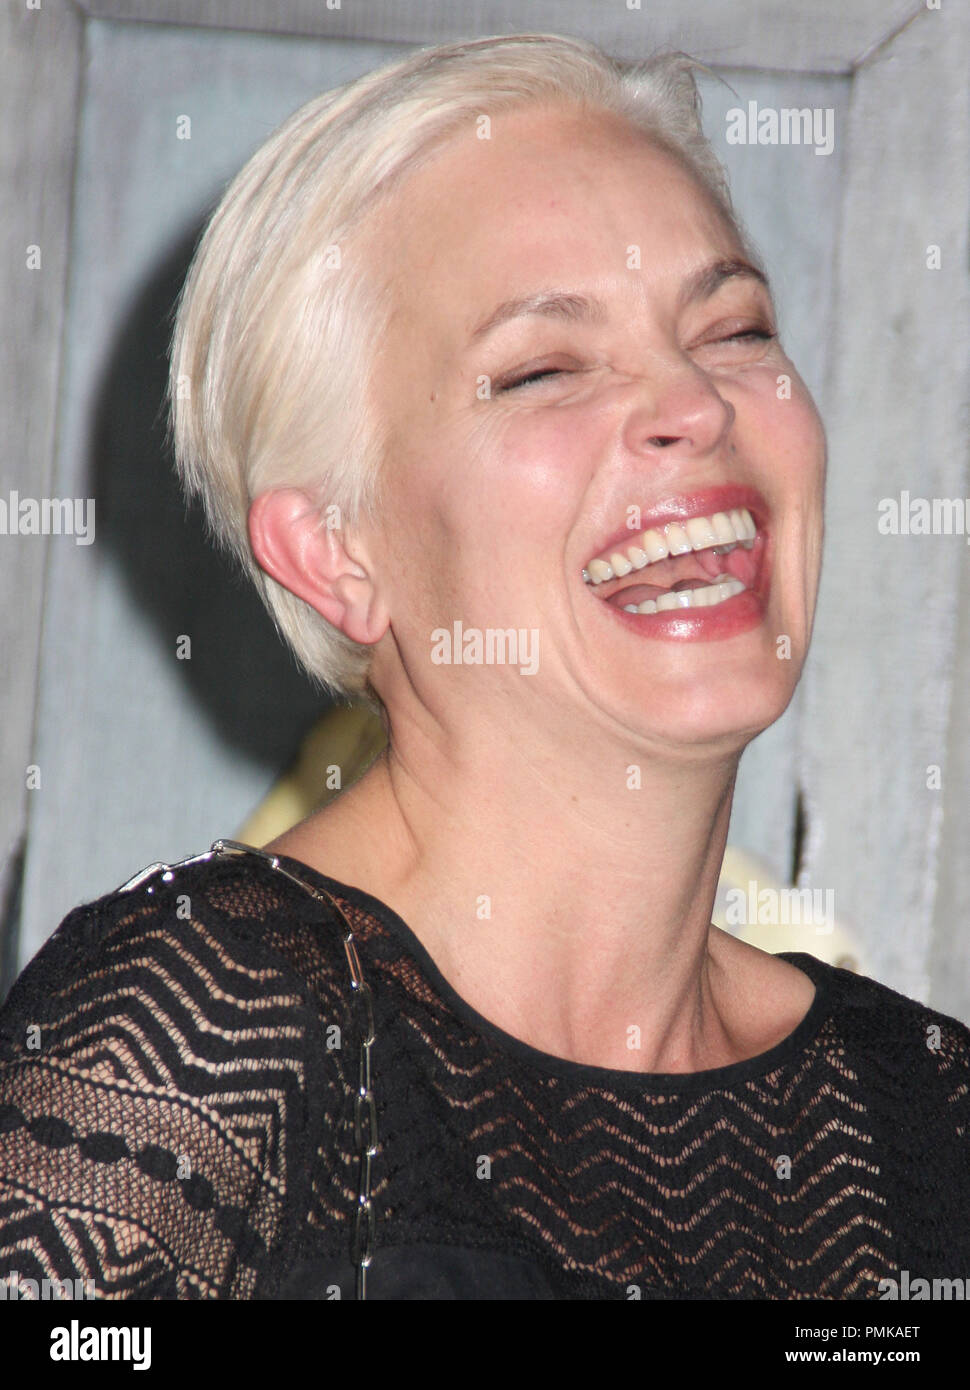 Elizabeth Gracen at the Los Angeles Premiere of RANGO held at the Regency Village Theatre in Los Angeles' Westwood area, CA on Monday, February 14, 2011. Photo by Pedro Ulayan Pacific Rim Photos / PictureLux Stock Photo